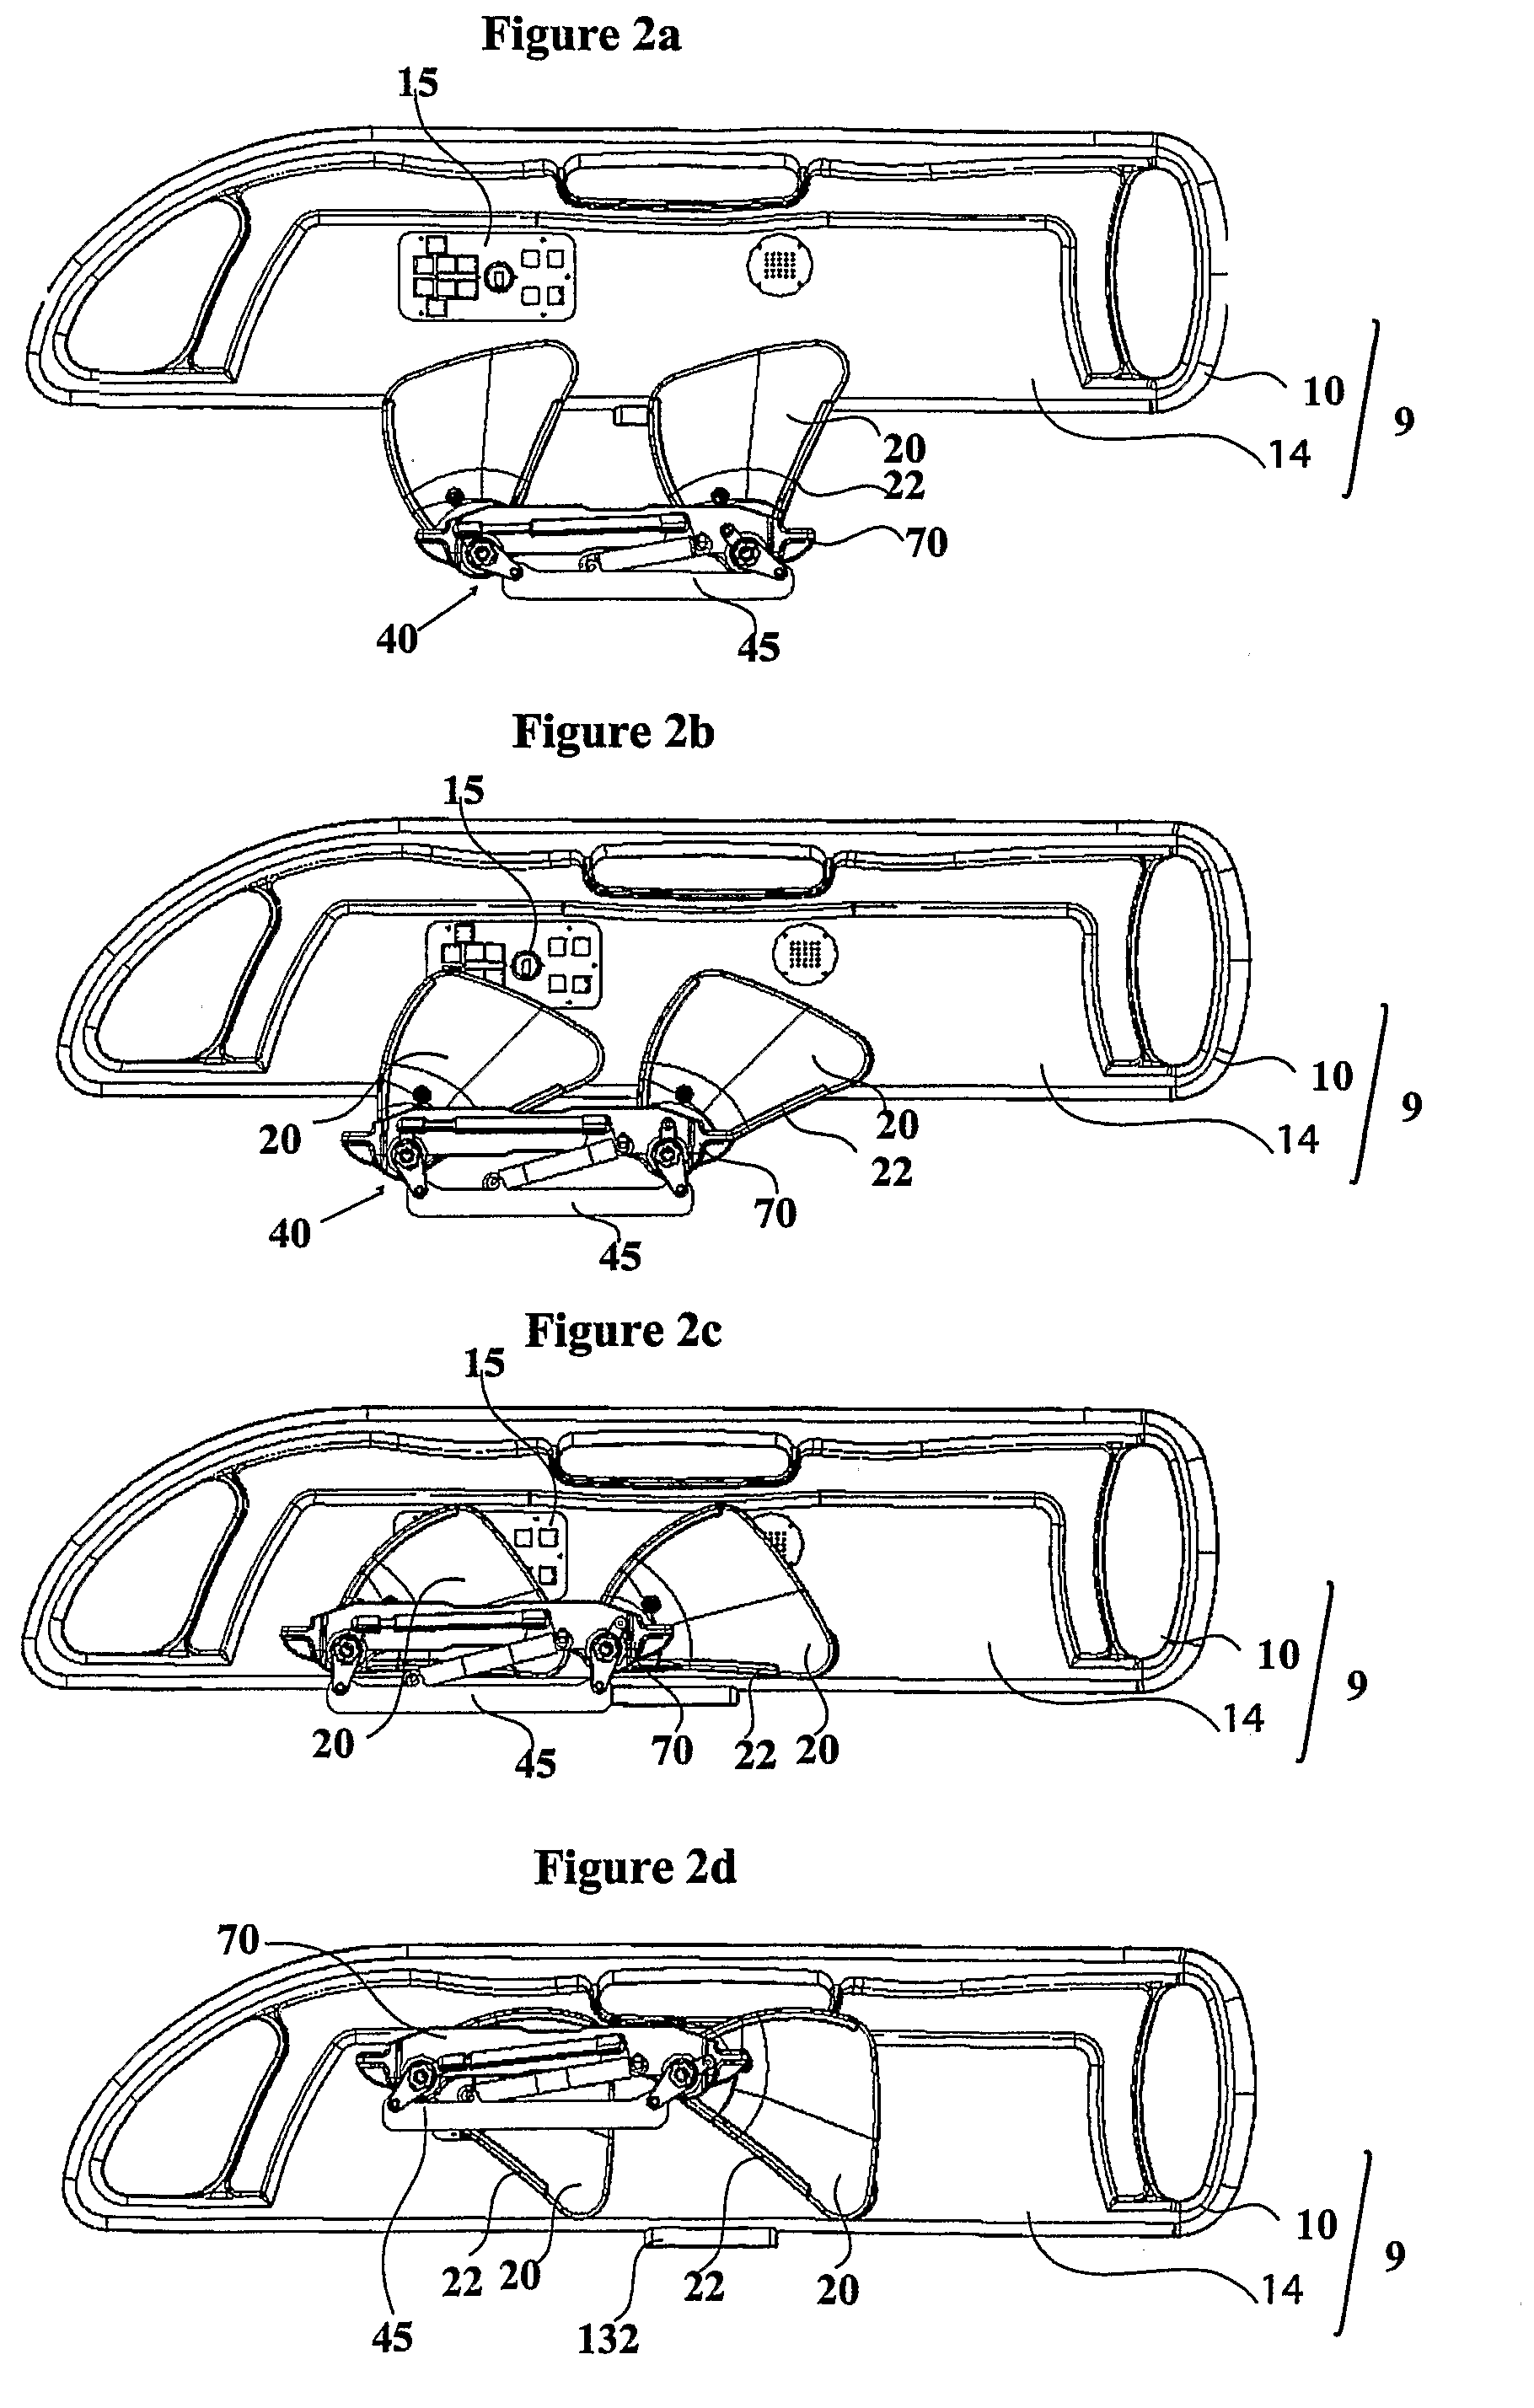 Movable siderail apparatus for use with a patient support apparatus